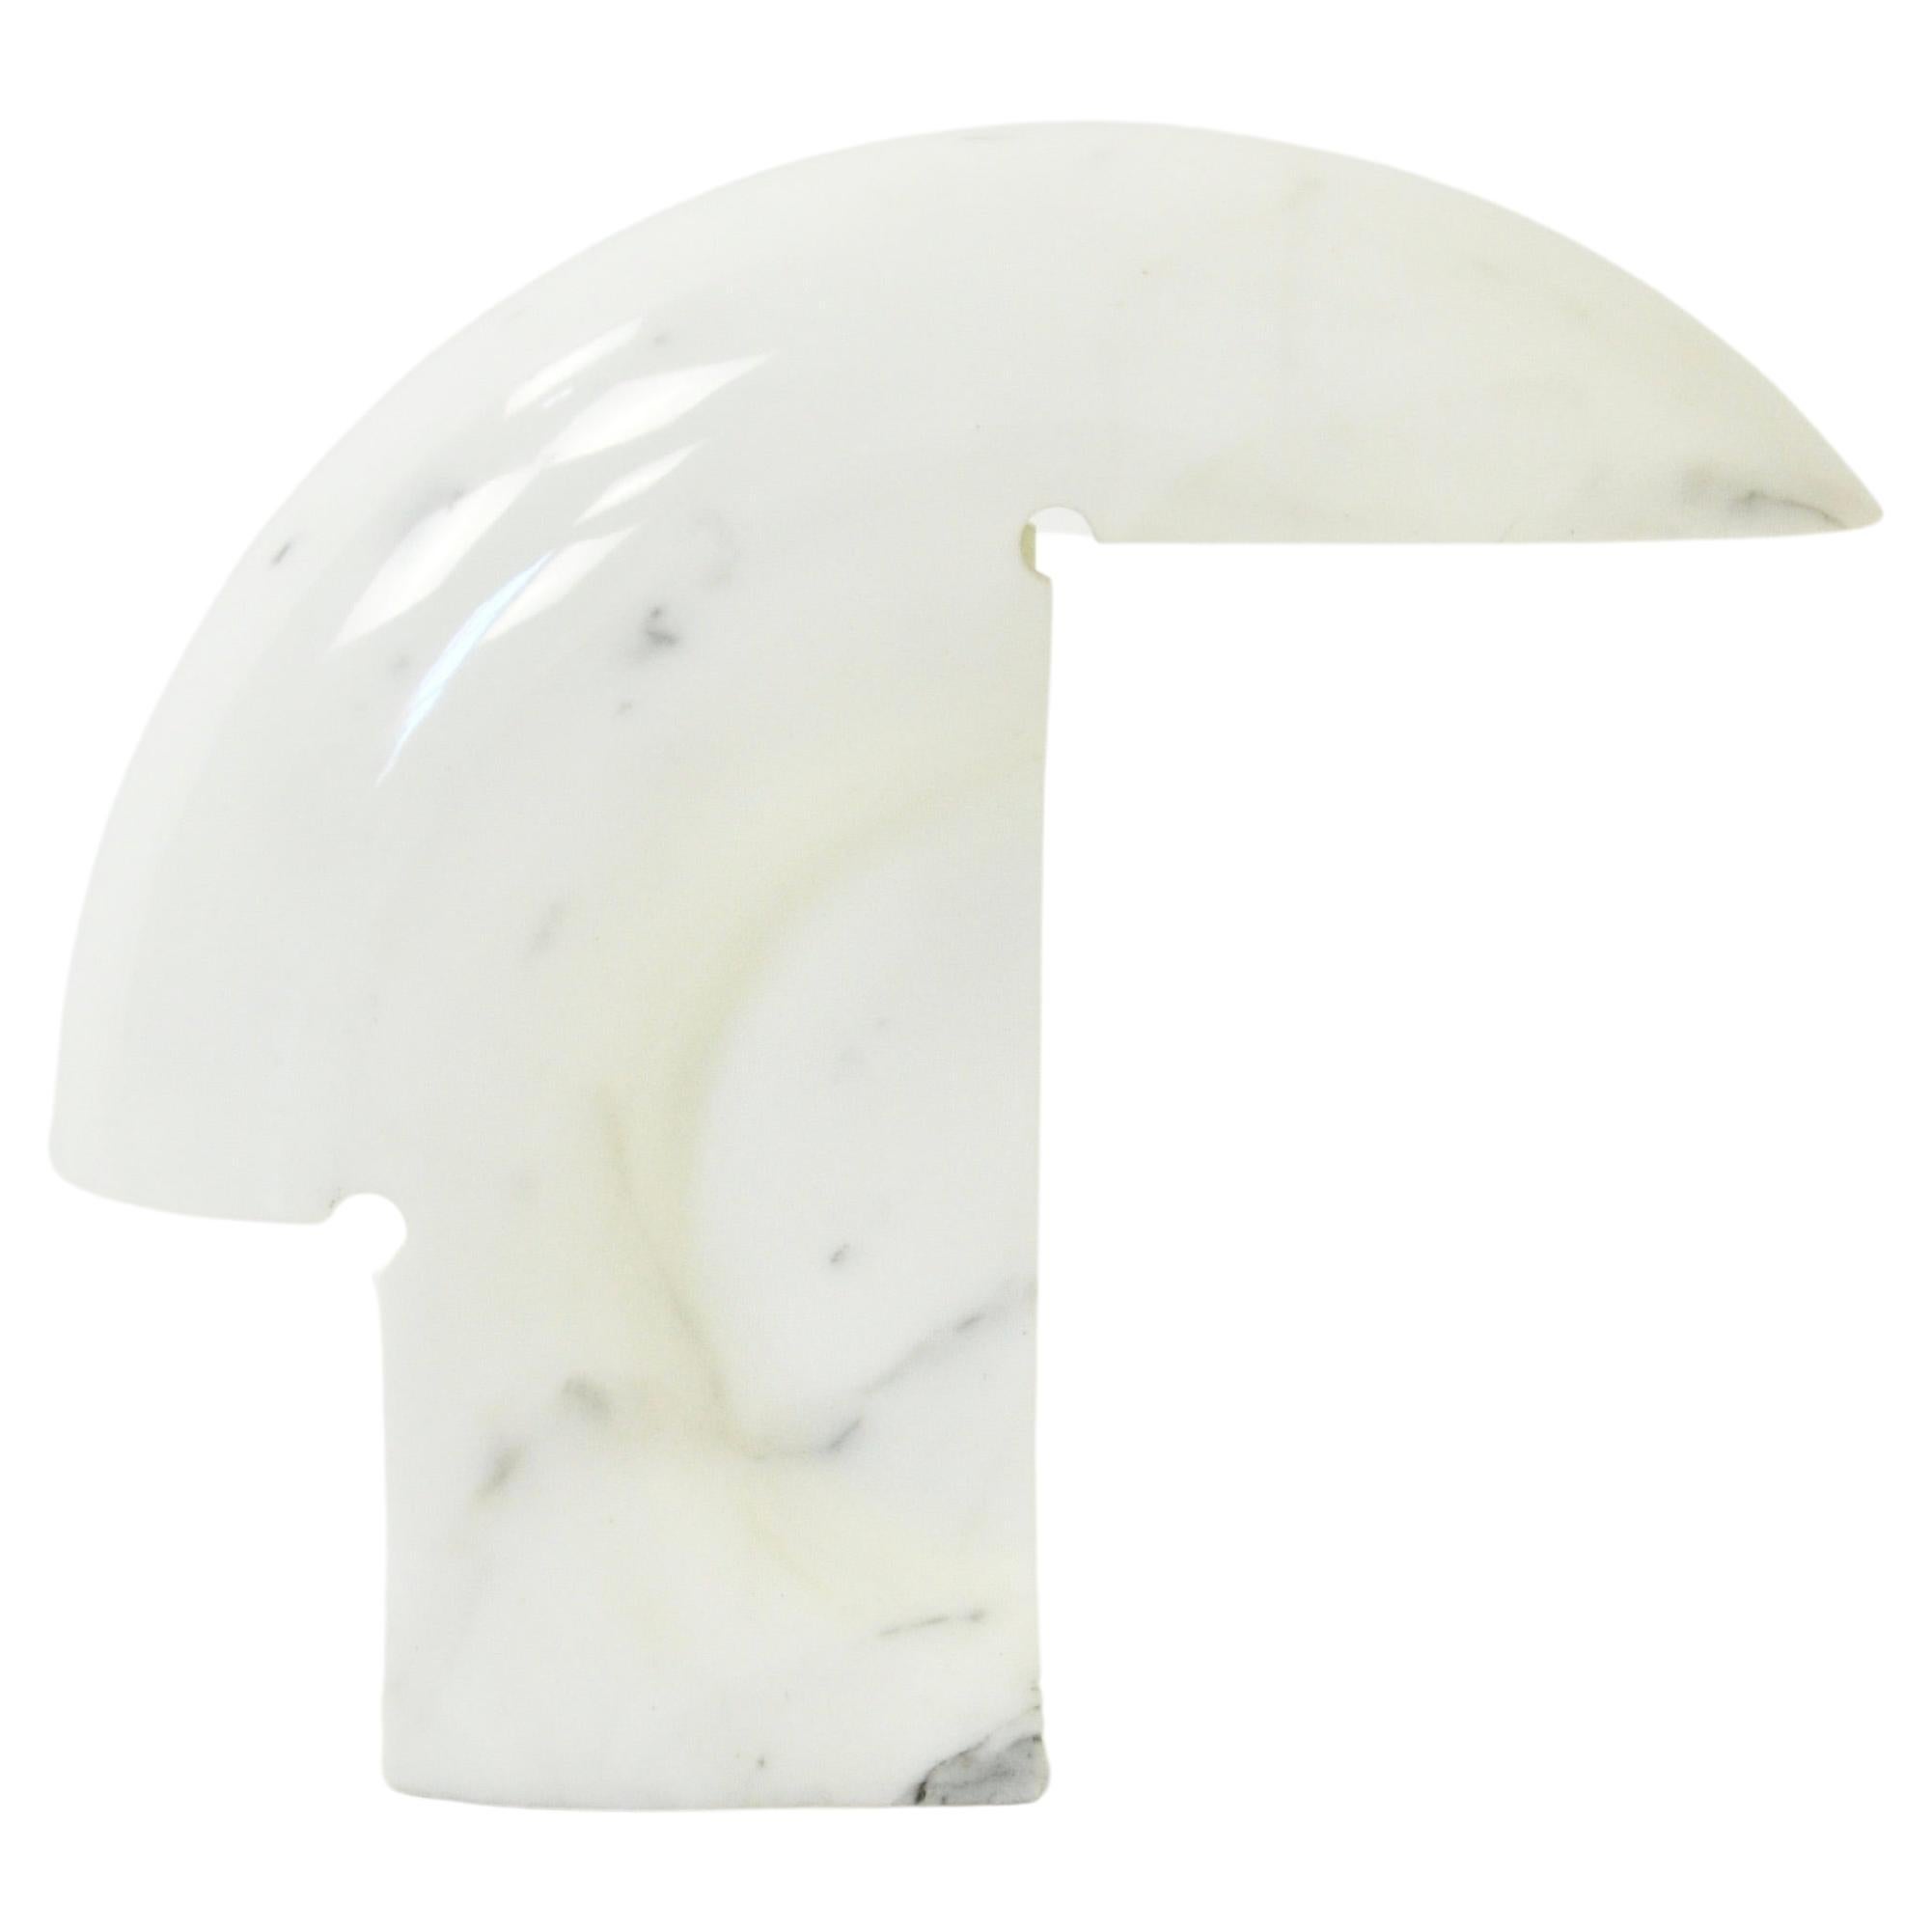 Marble Biagio Table Lamp by Tobia Scarpa for Flos, 1968